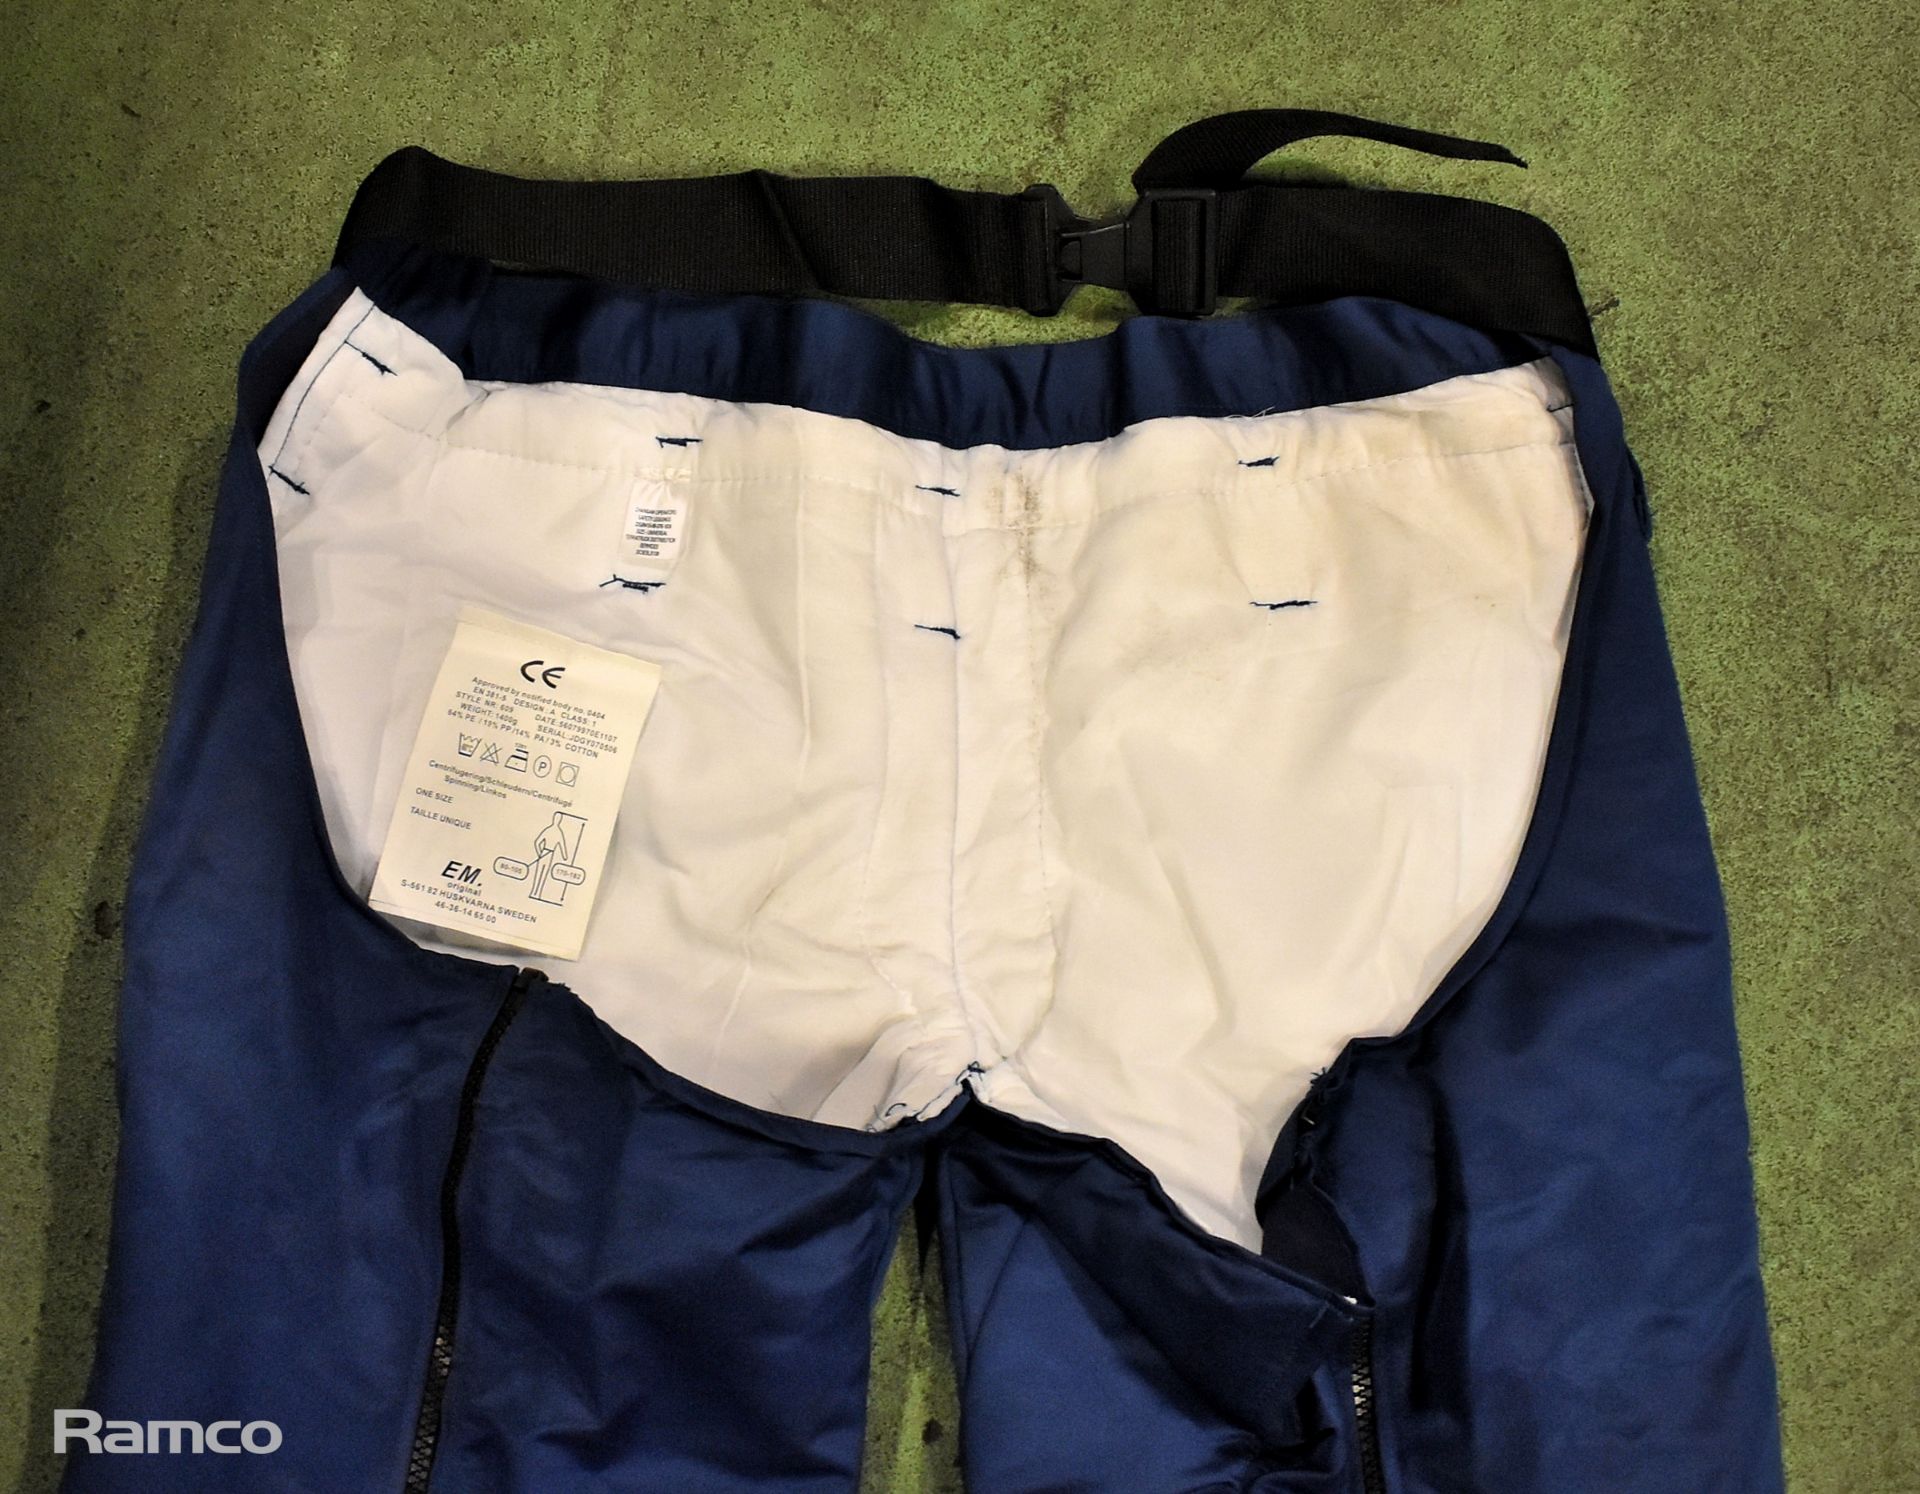 2x Husqvarna chainsaw safety leggings, 2x Oregon operators safety spats - see description - Image 6 of 8